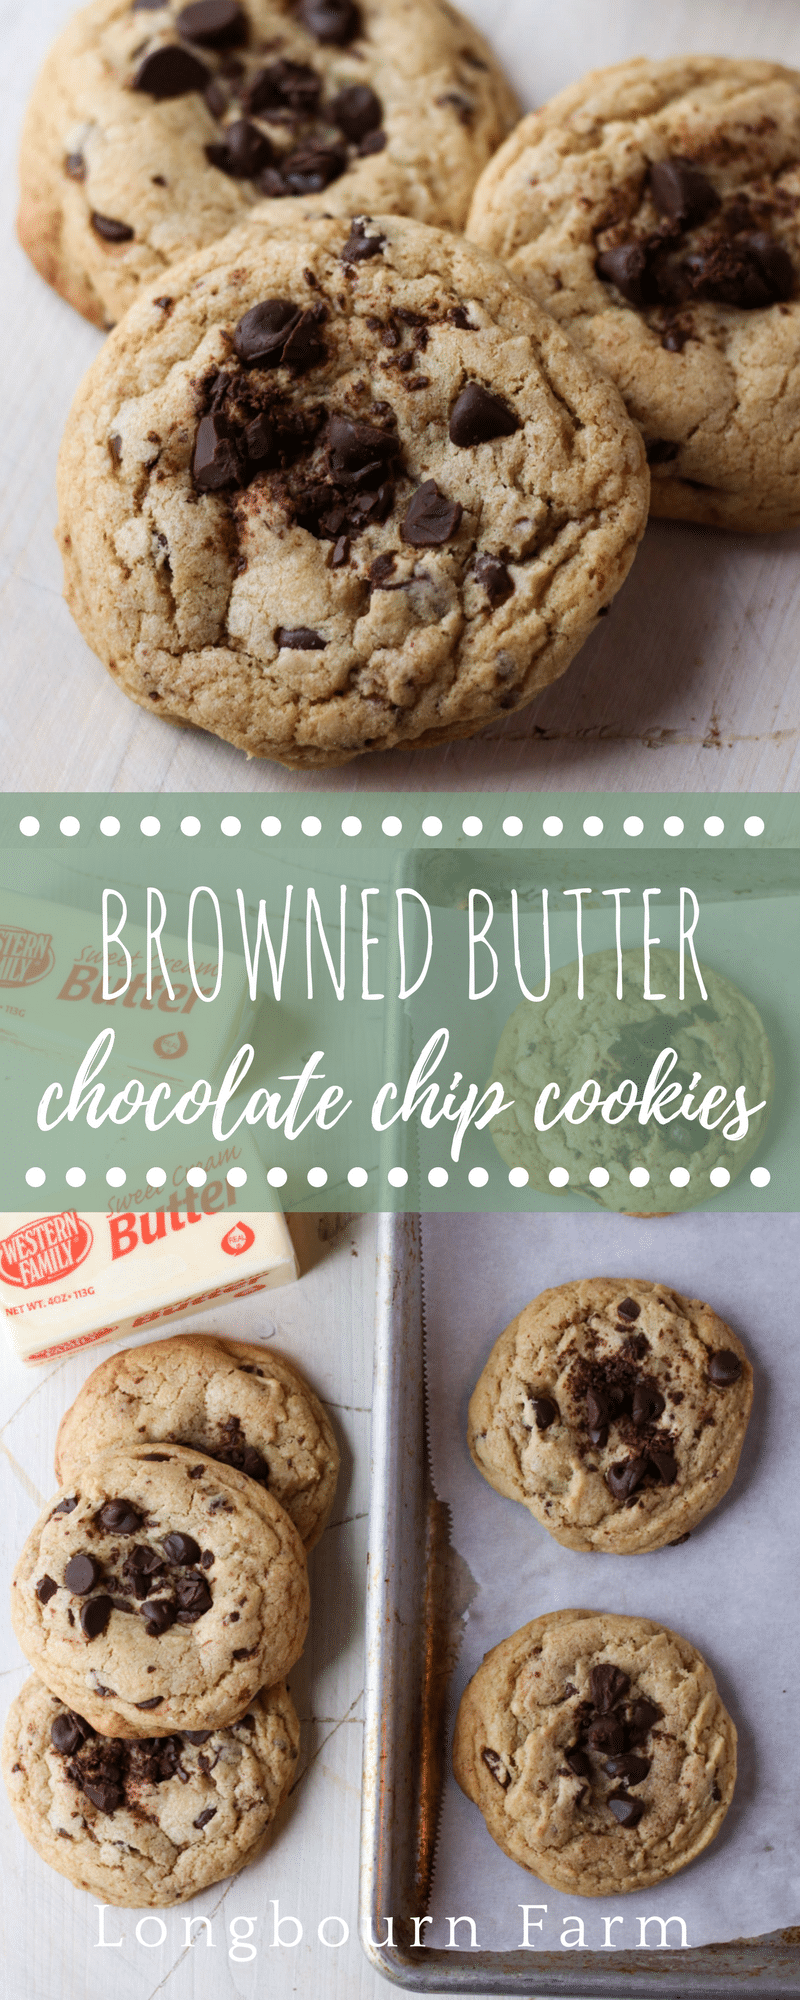 Browned butter chocolate chip cookies take a classic recipe and give it a decadent twist. With detailed direction on how to brown butter, this recipe is easy!